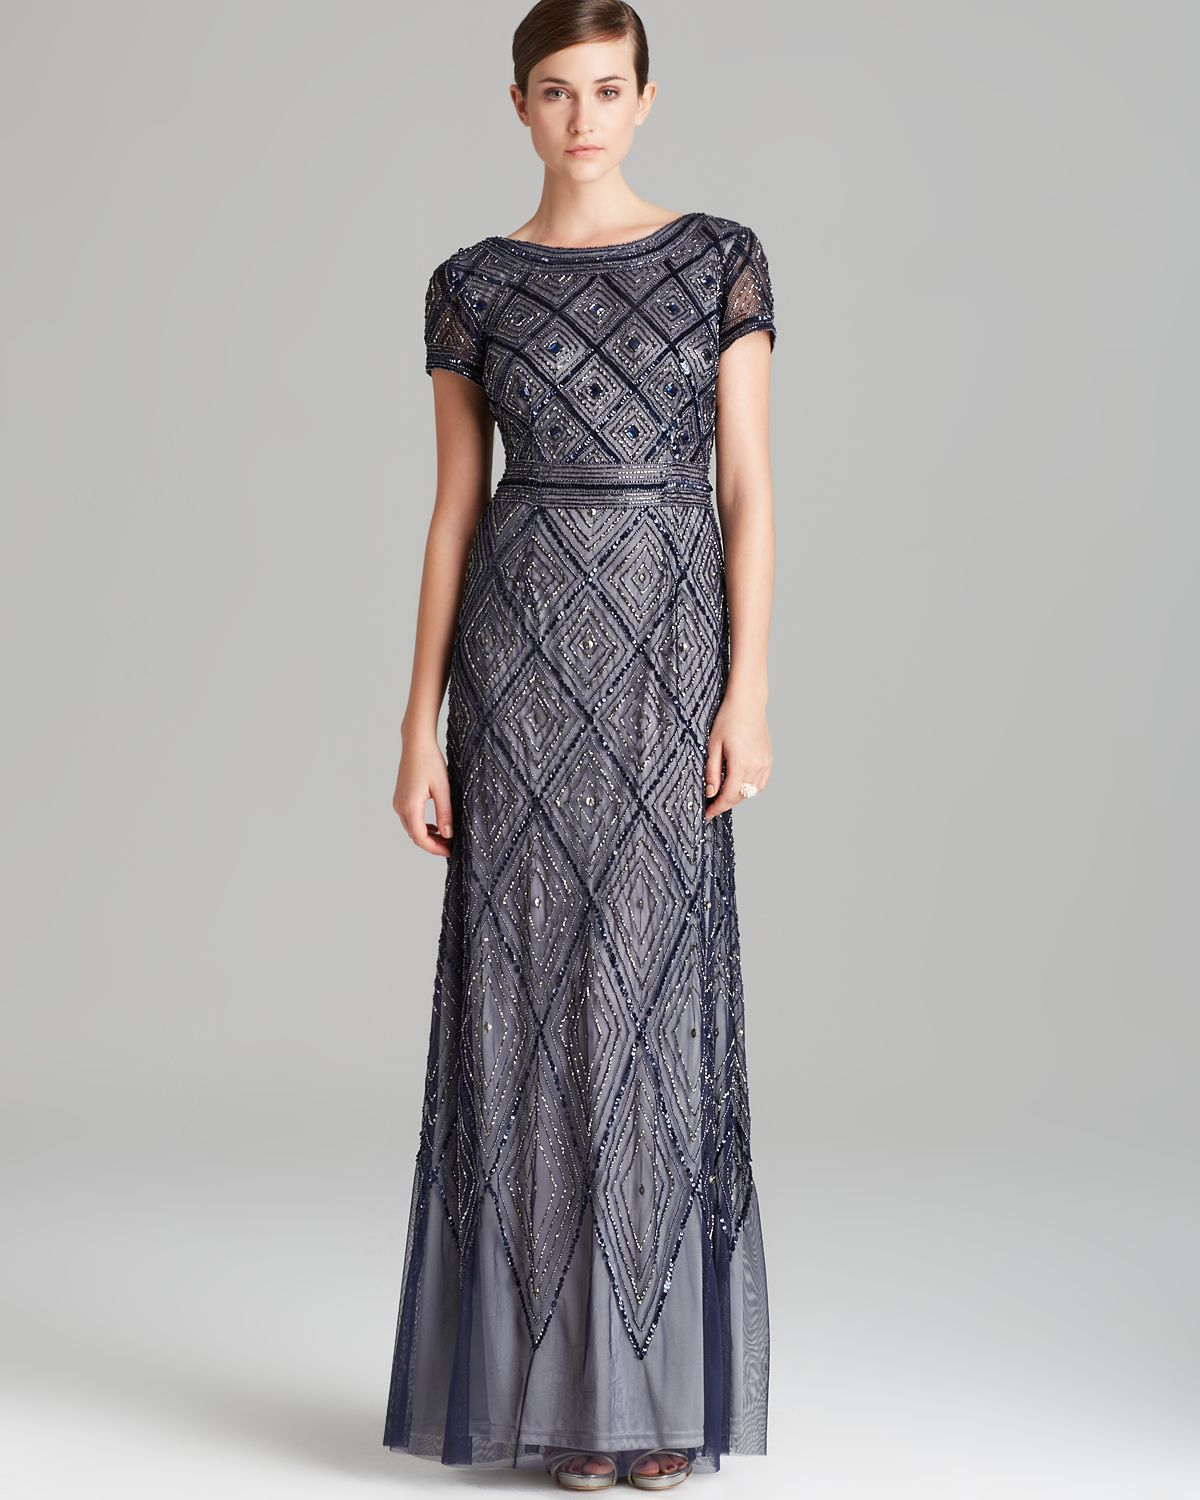 Adrianna Papell Gown Short Sleeve Deco Diamond Beaded in Navy/Silver (Blue)  | Lyst